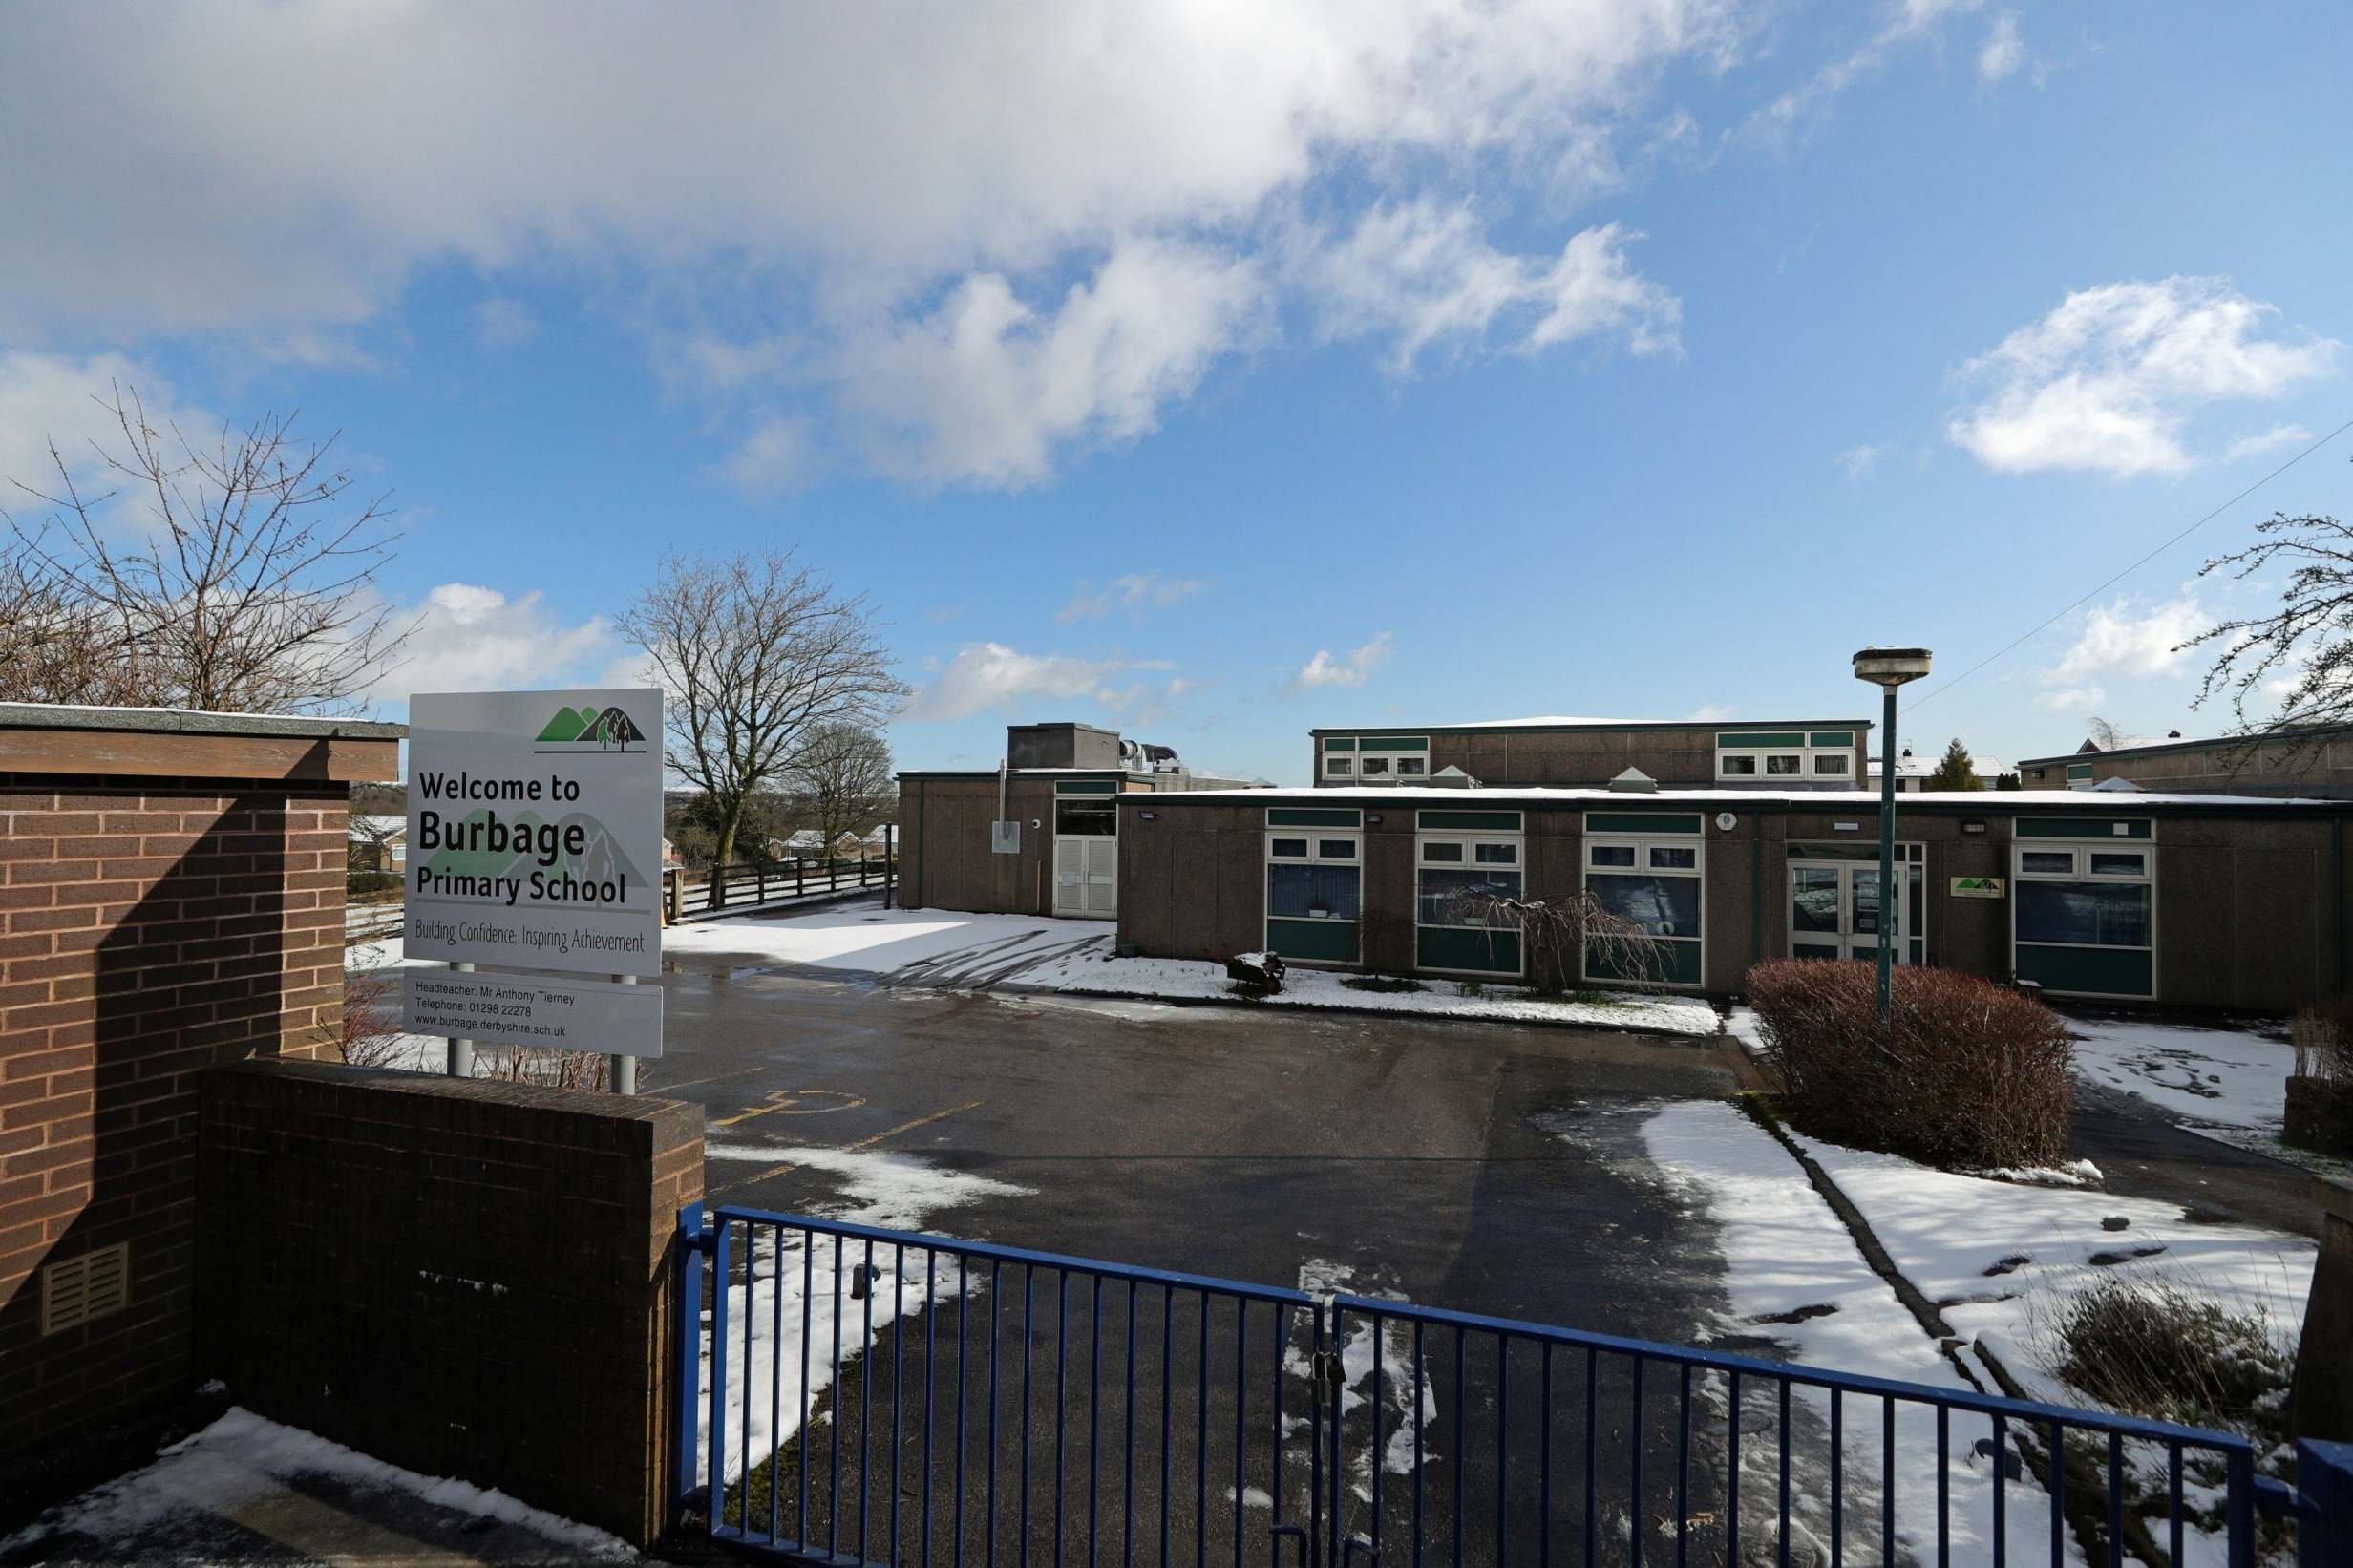 Some schools, including Burbage Primary School in Derbyshire, have been closed after confirmed coronavirus cases and student and parent populations